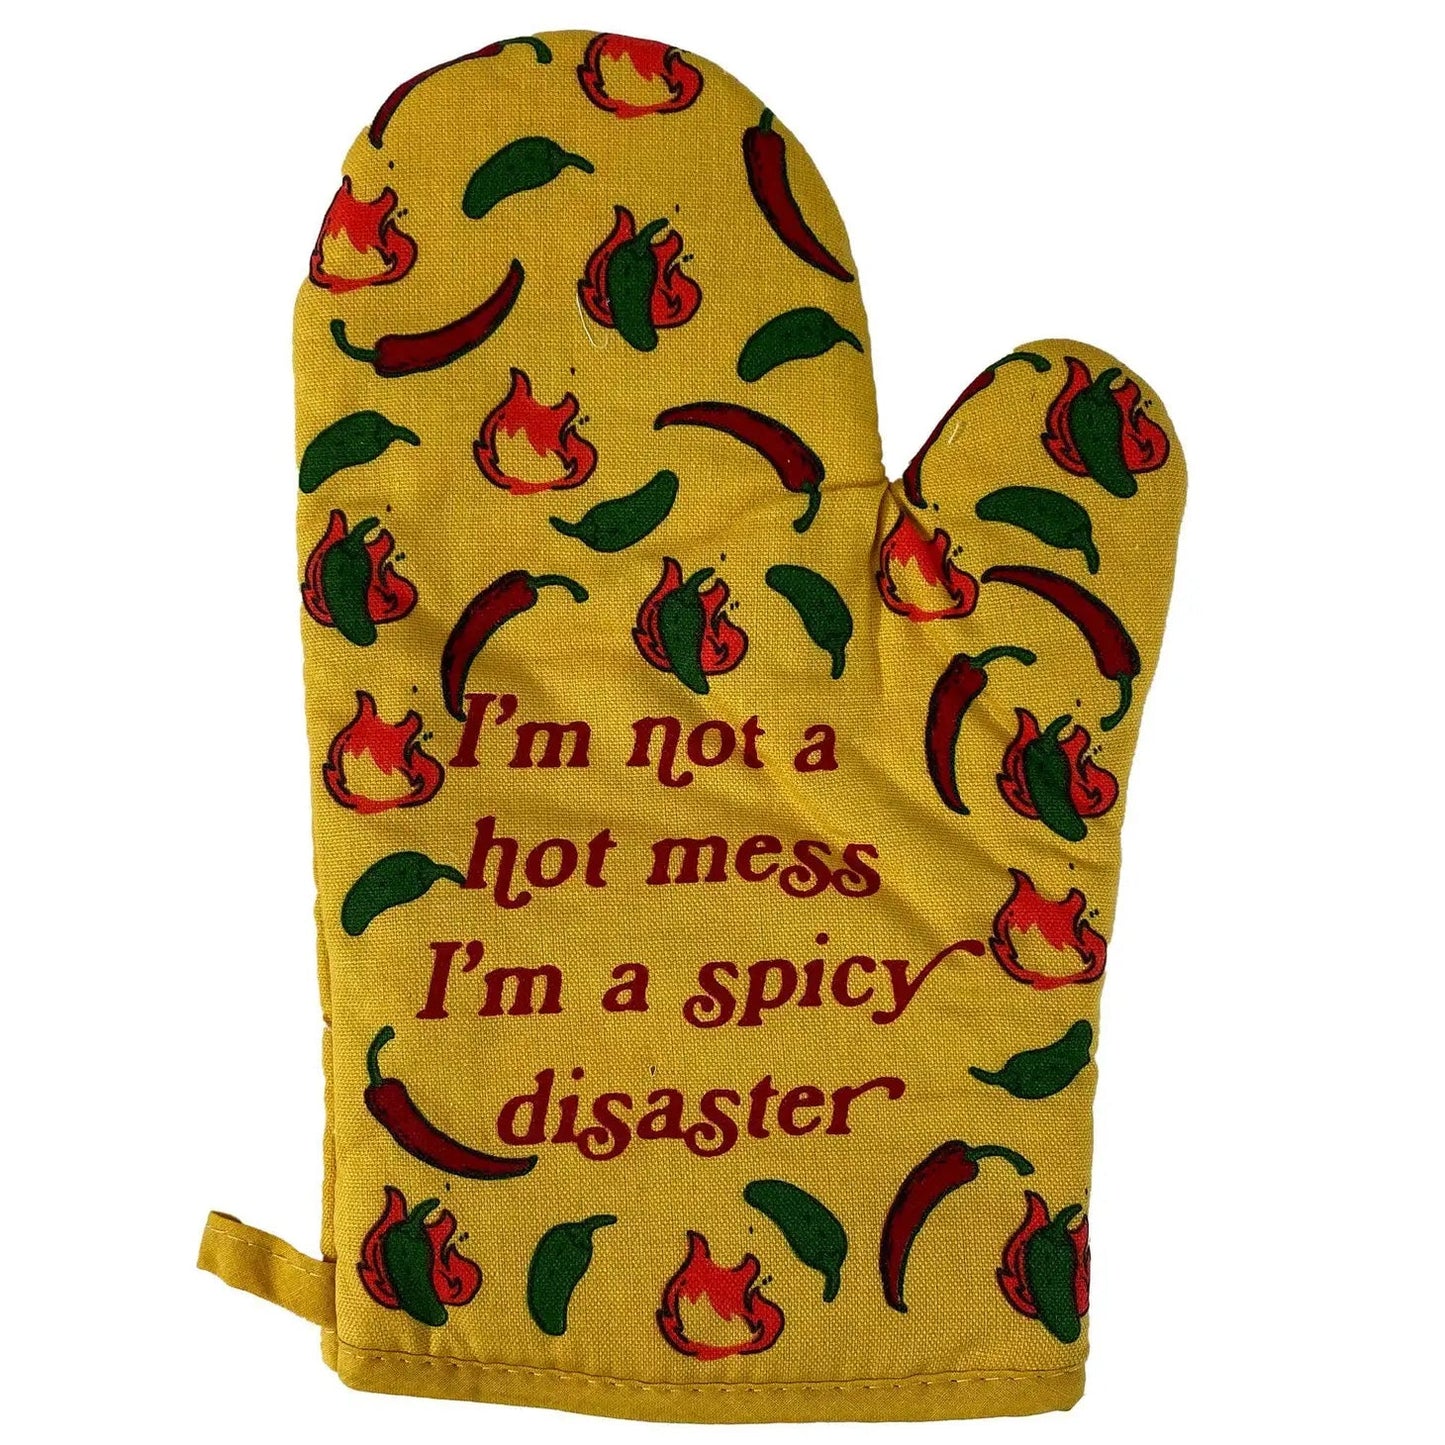 I'm Not a Hot Mess I'm a Spicy Disaster Oven Mitt in Chili Peppers Motif